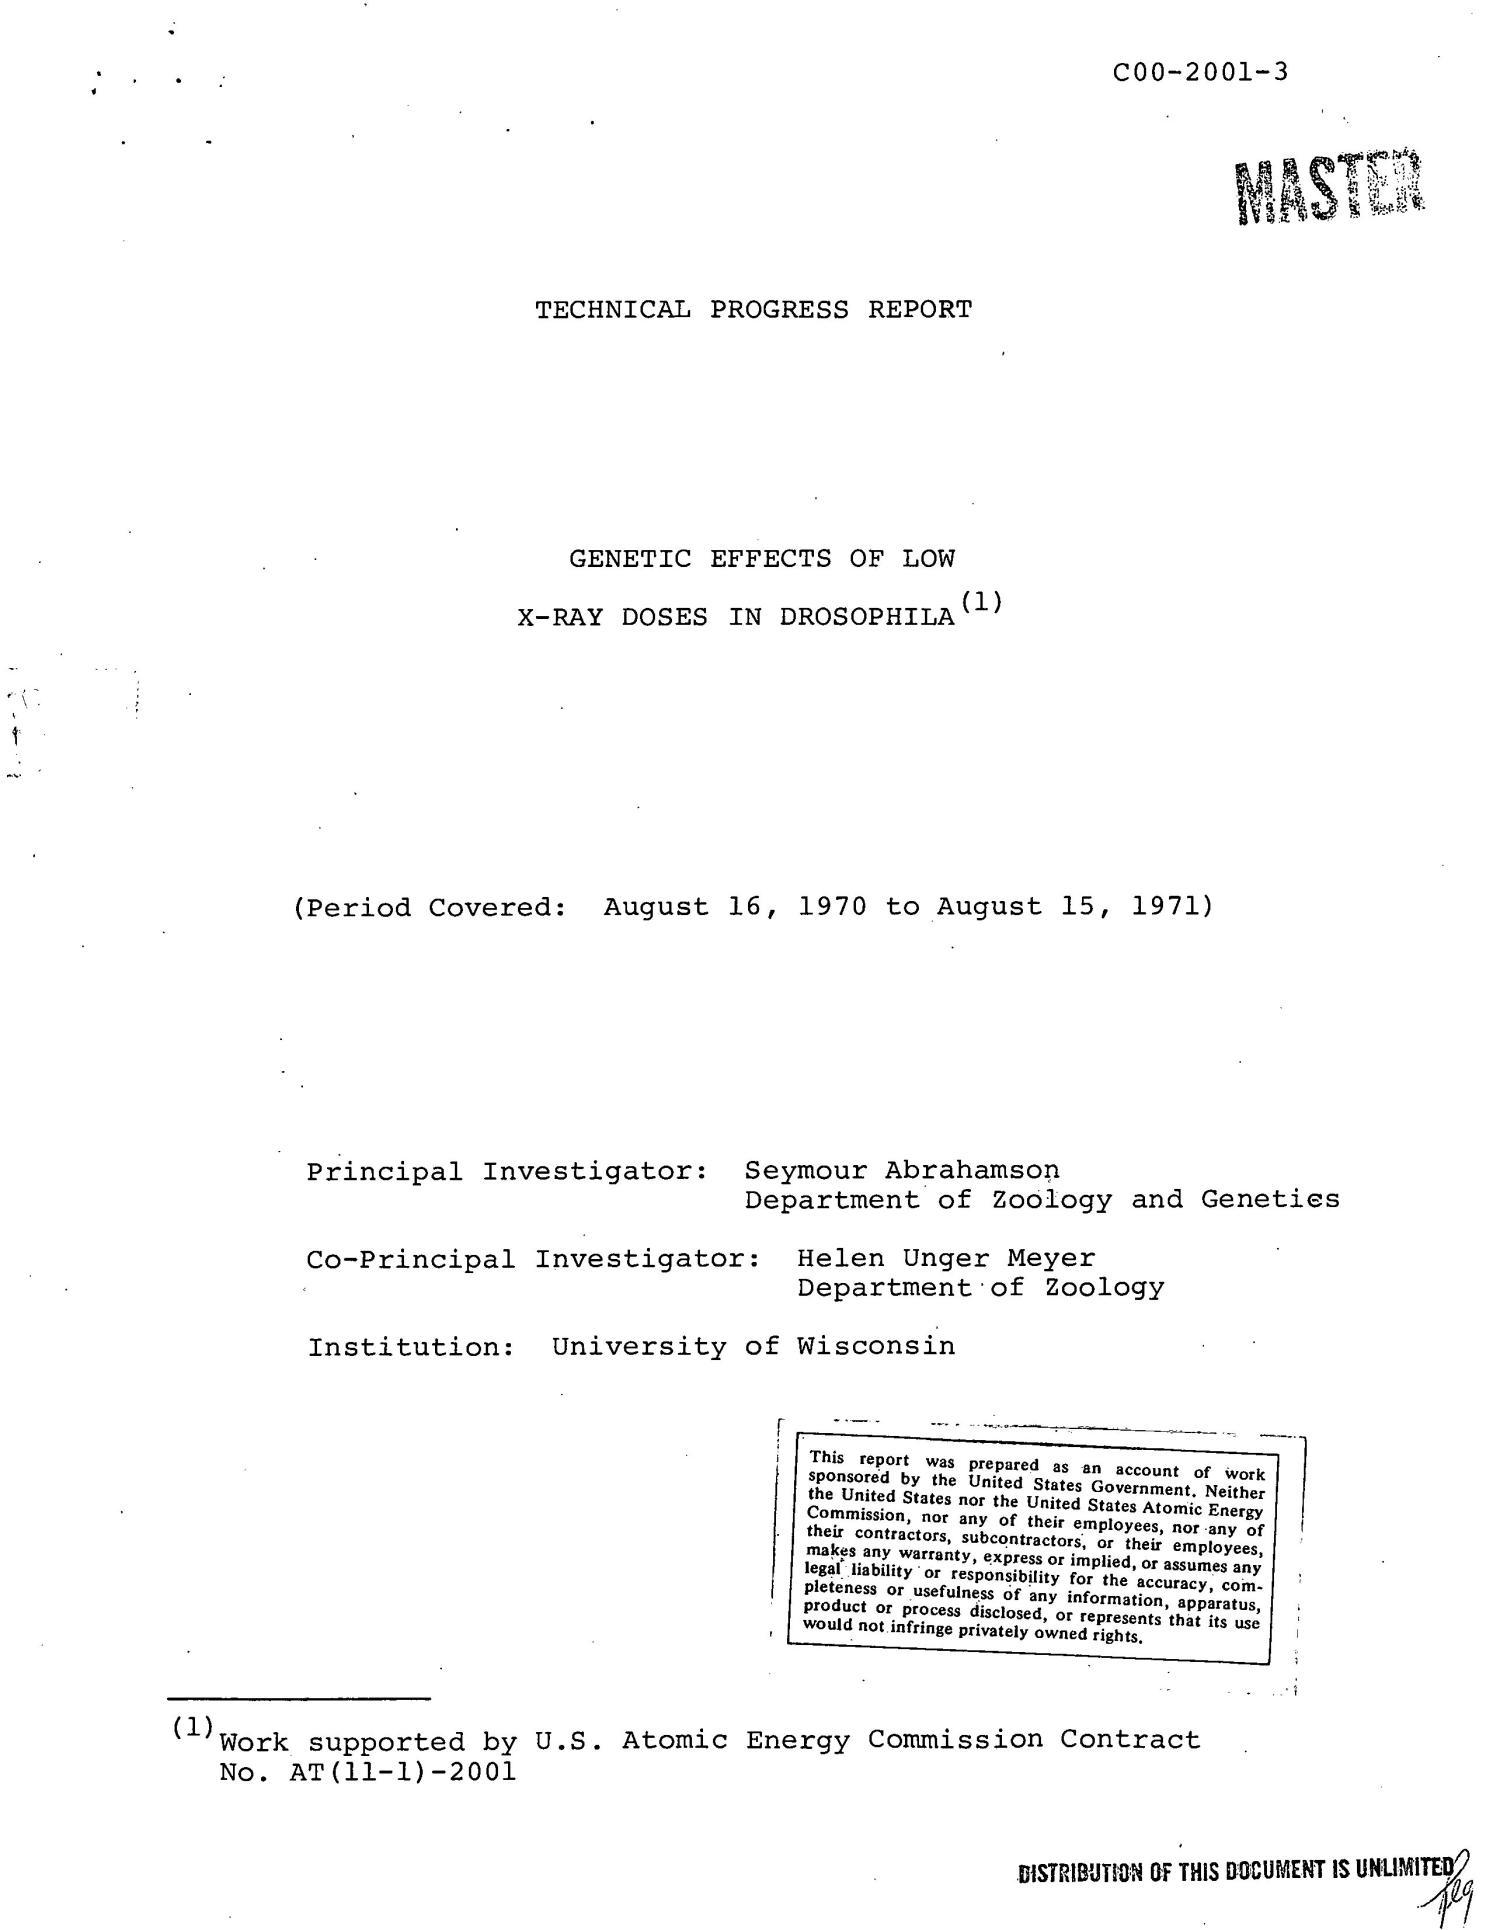 GENETIC EFFECTS OF LOW X-RAY DOSES IN DROSOPHILA. Technical Progress Report, August 16, 1970--August 15, 1971.
                                                
                                                    [Sequence #]: 1 of 11
                                                